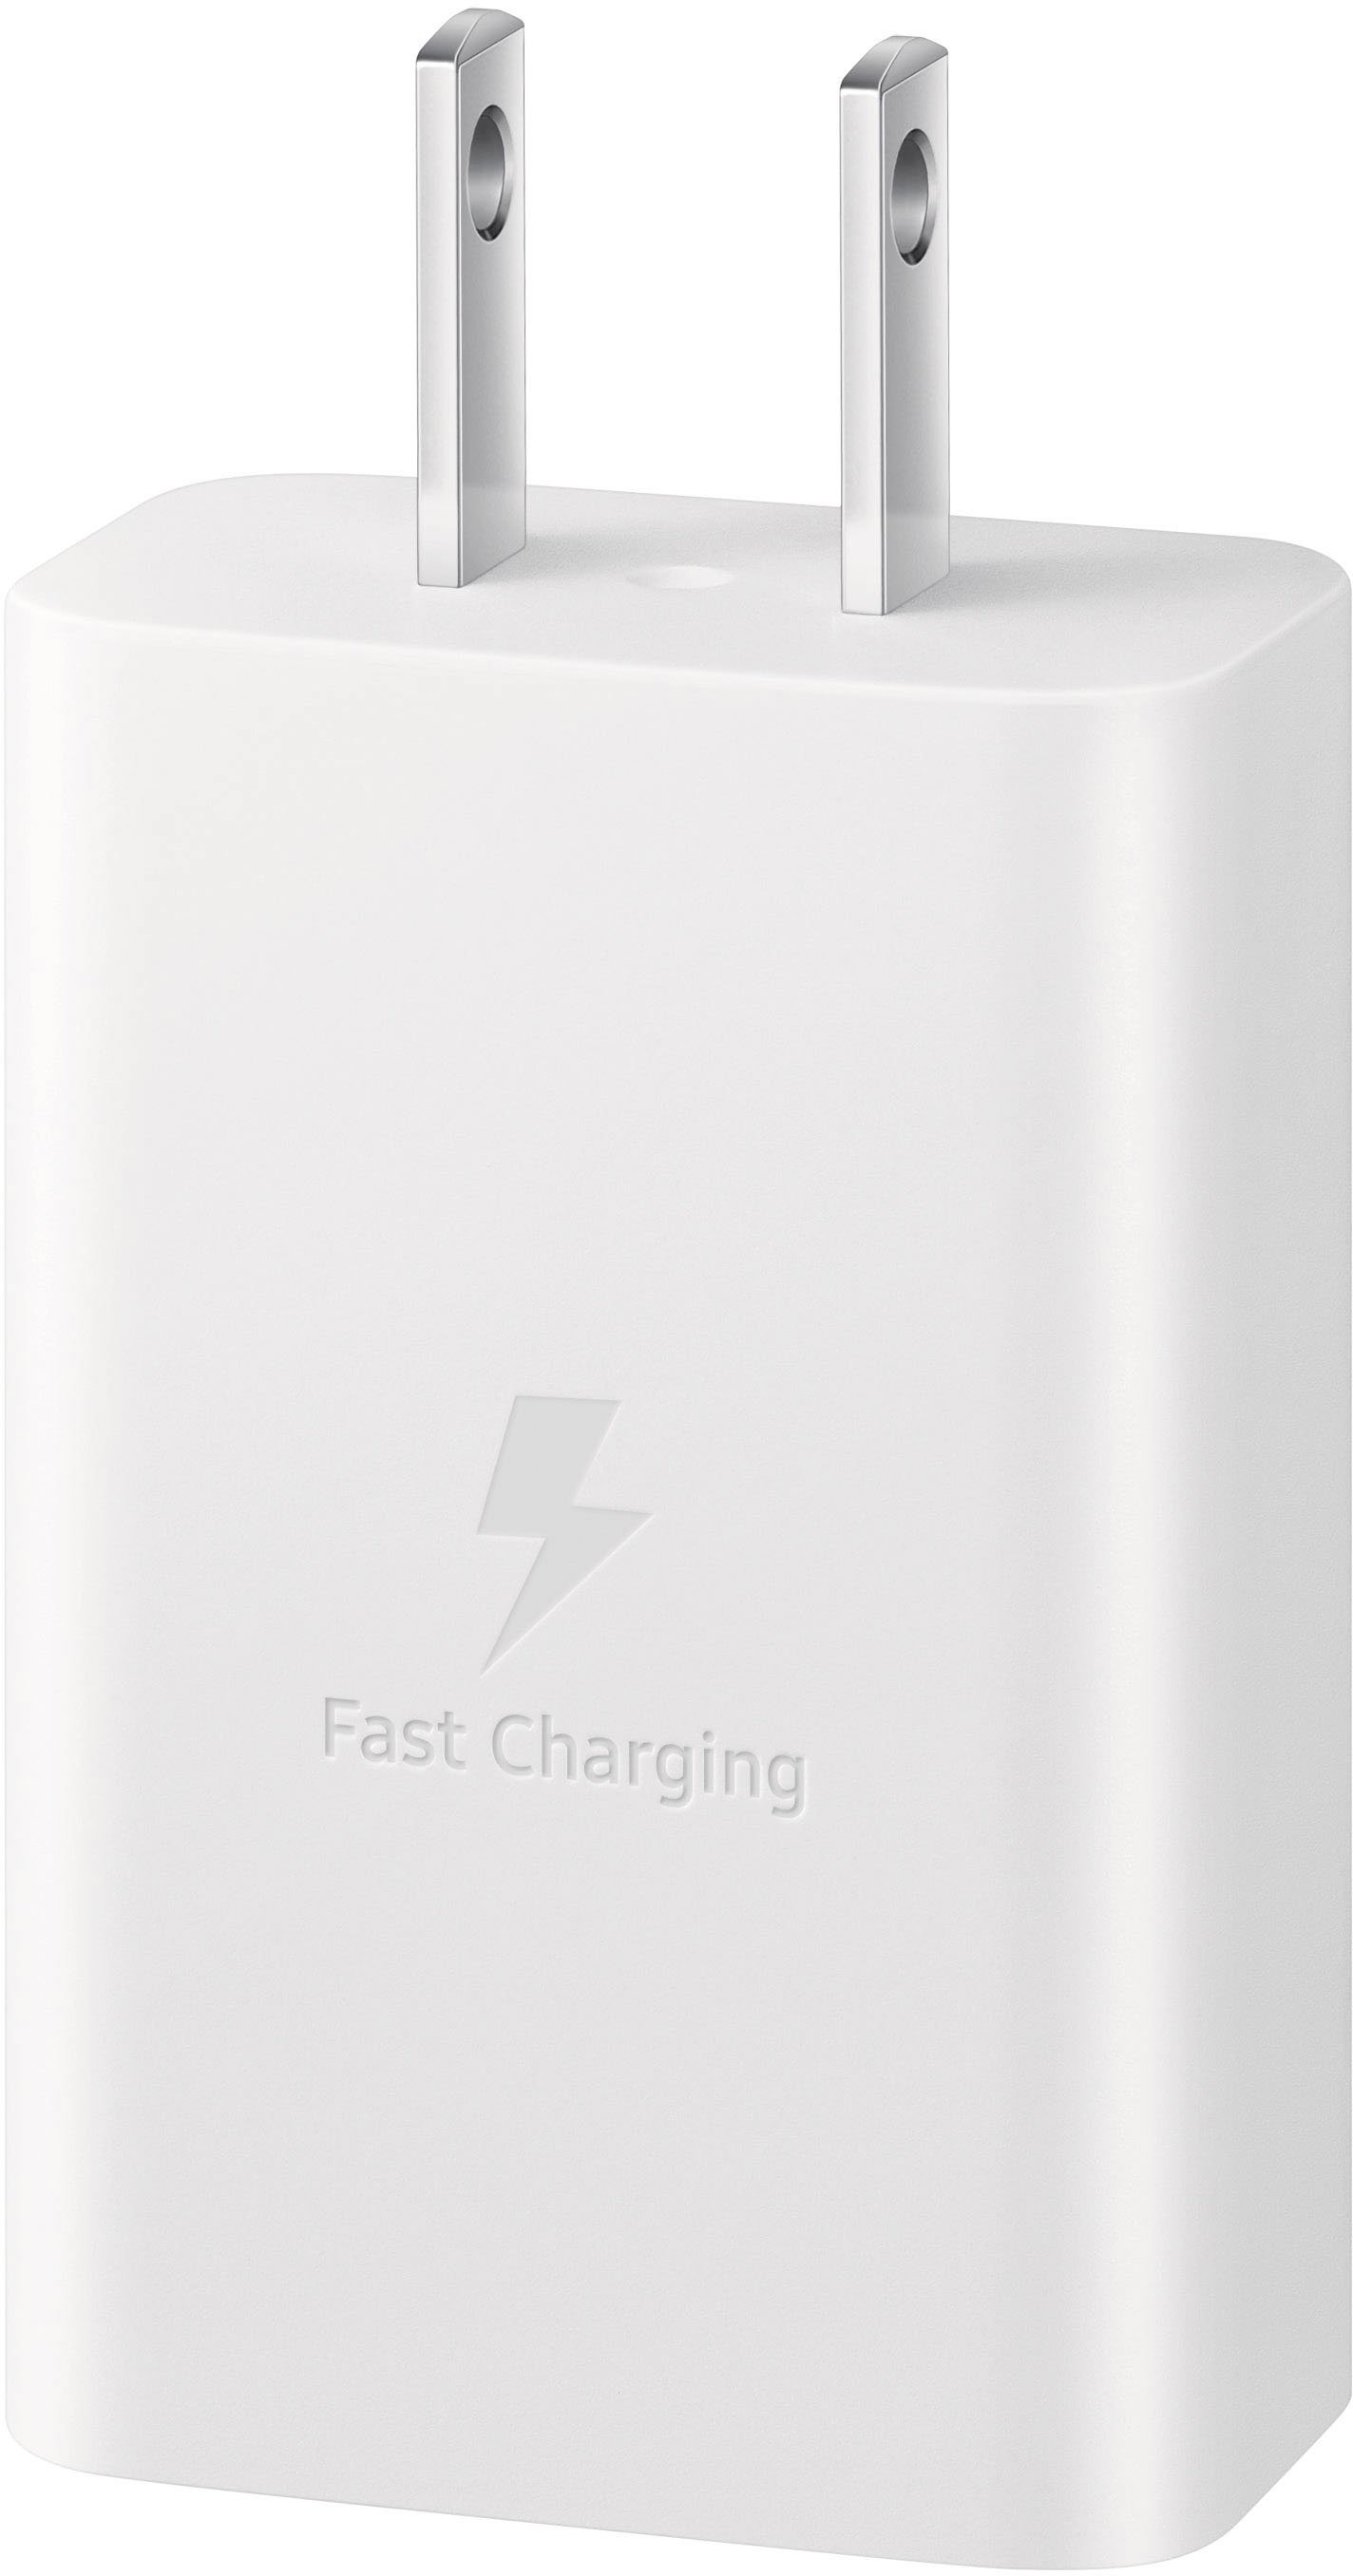 Samsung Fast Charging 15W USB Type-C Wall Charger White EP-T1510NWEGUS -  Best Buy